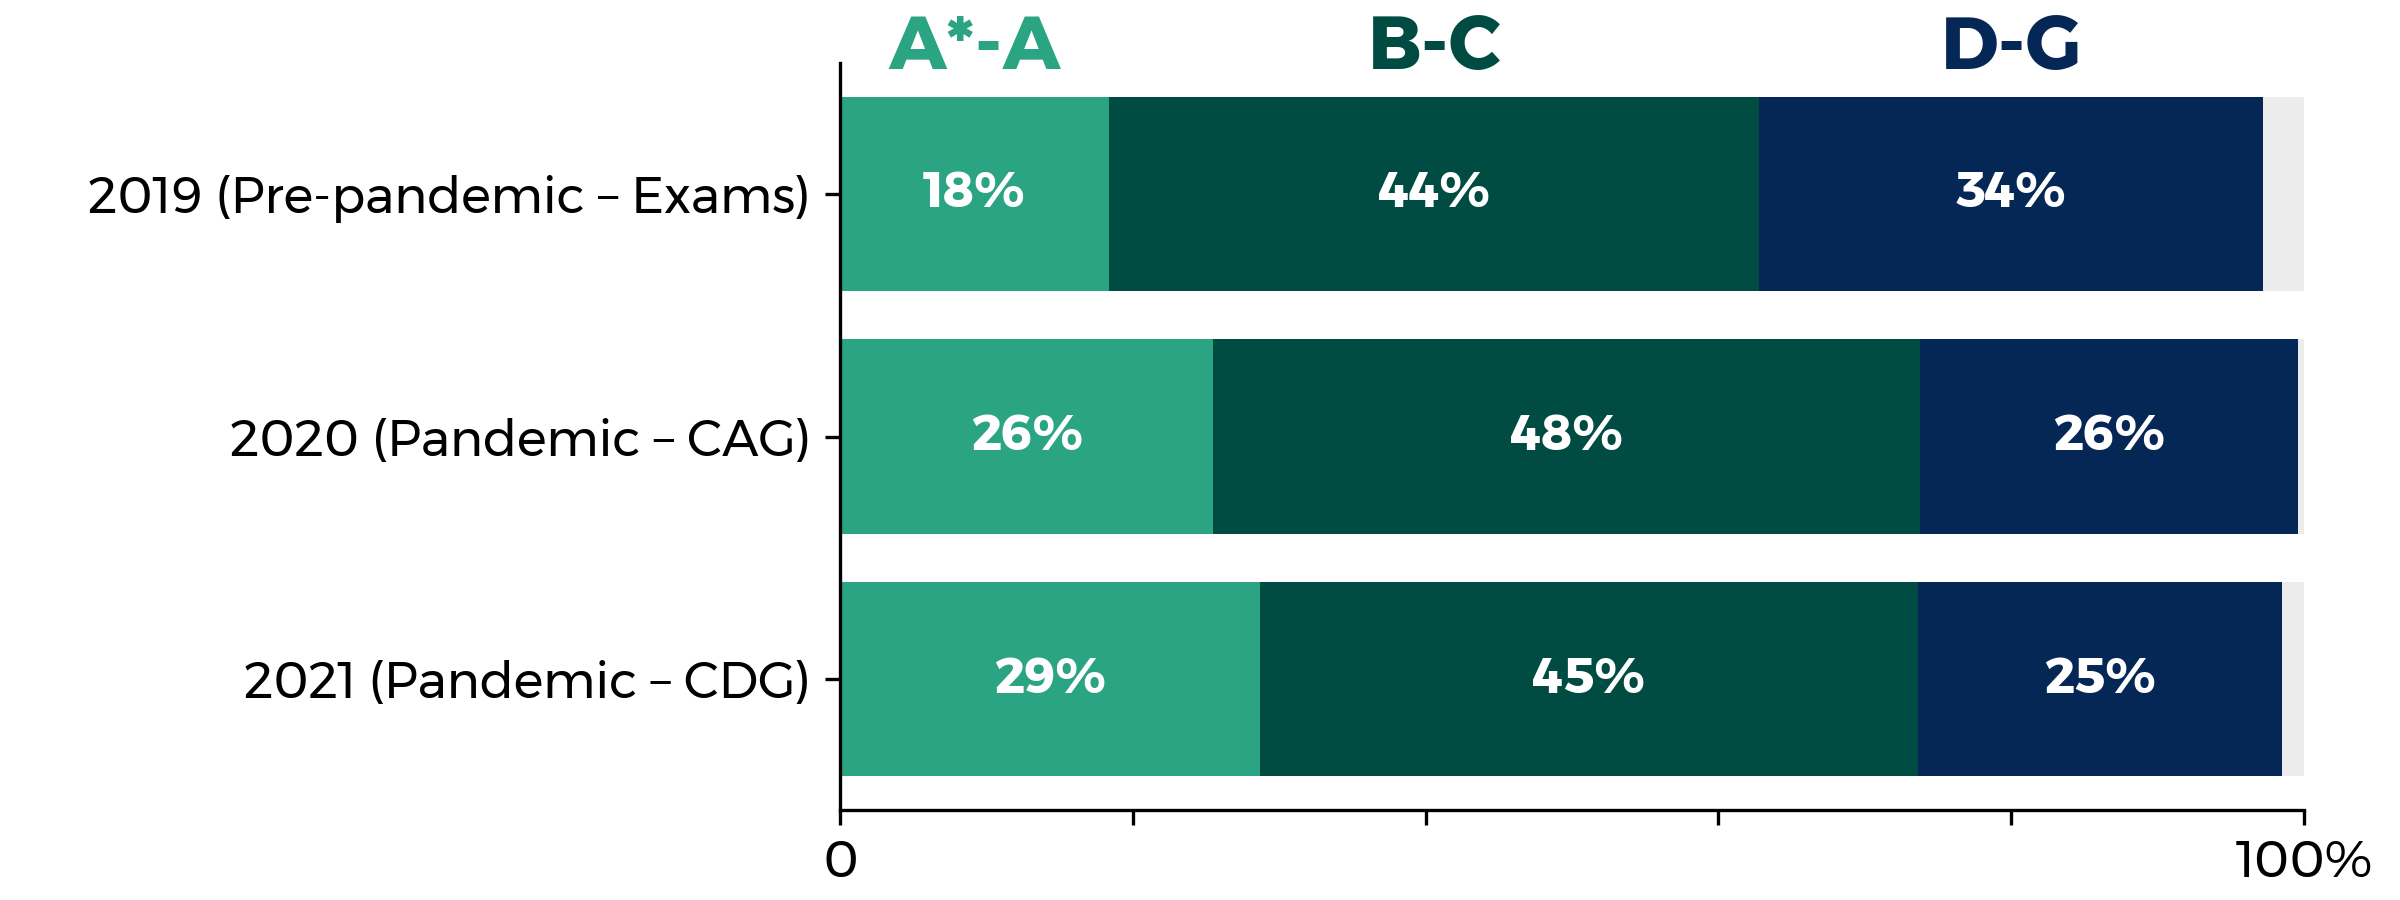 Graph showing how the proportion of candidates achieving the highest grades at GCSE has increased over the past two years. 2019 (pre-pandemic - exams): A*-A 18%, B-C 44%, D-G 34%. 2020 (pandemic – CAG): A*-A 26%, B-C 48%, D-G 26%. 2021 (pandemic – CDG): A*-A 29%, B-C 45%, D-G 25%.